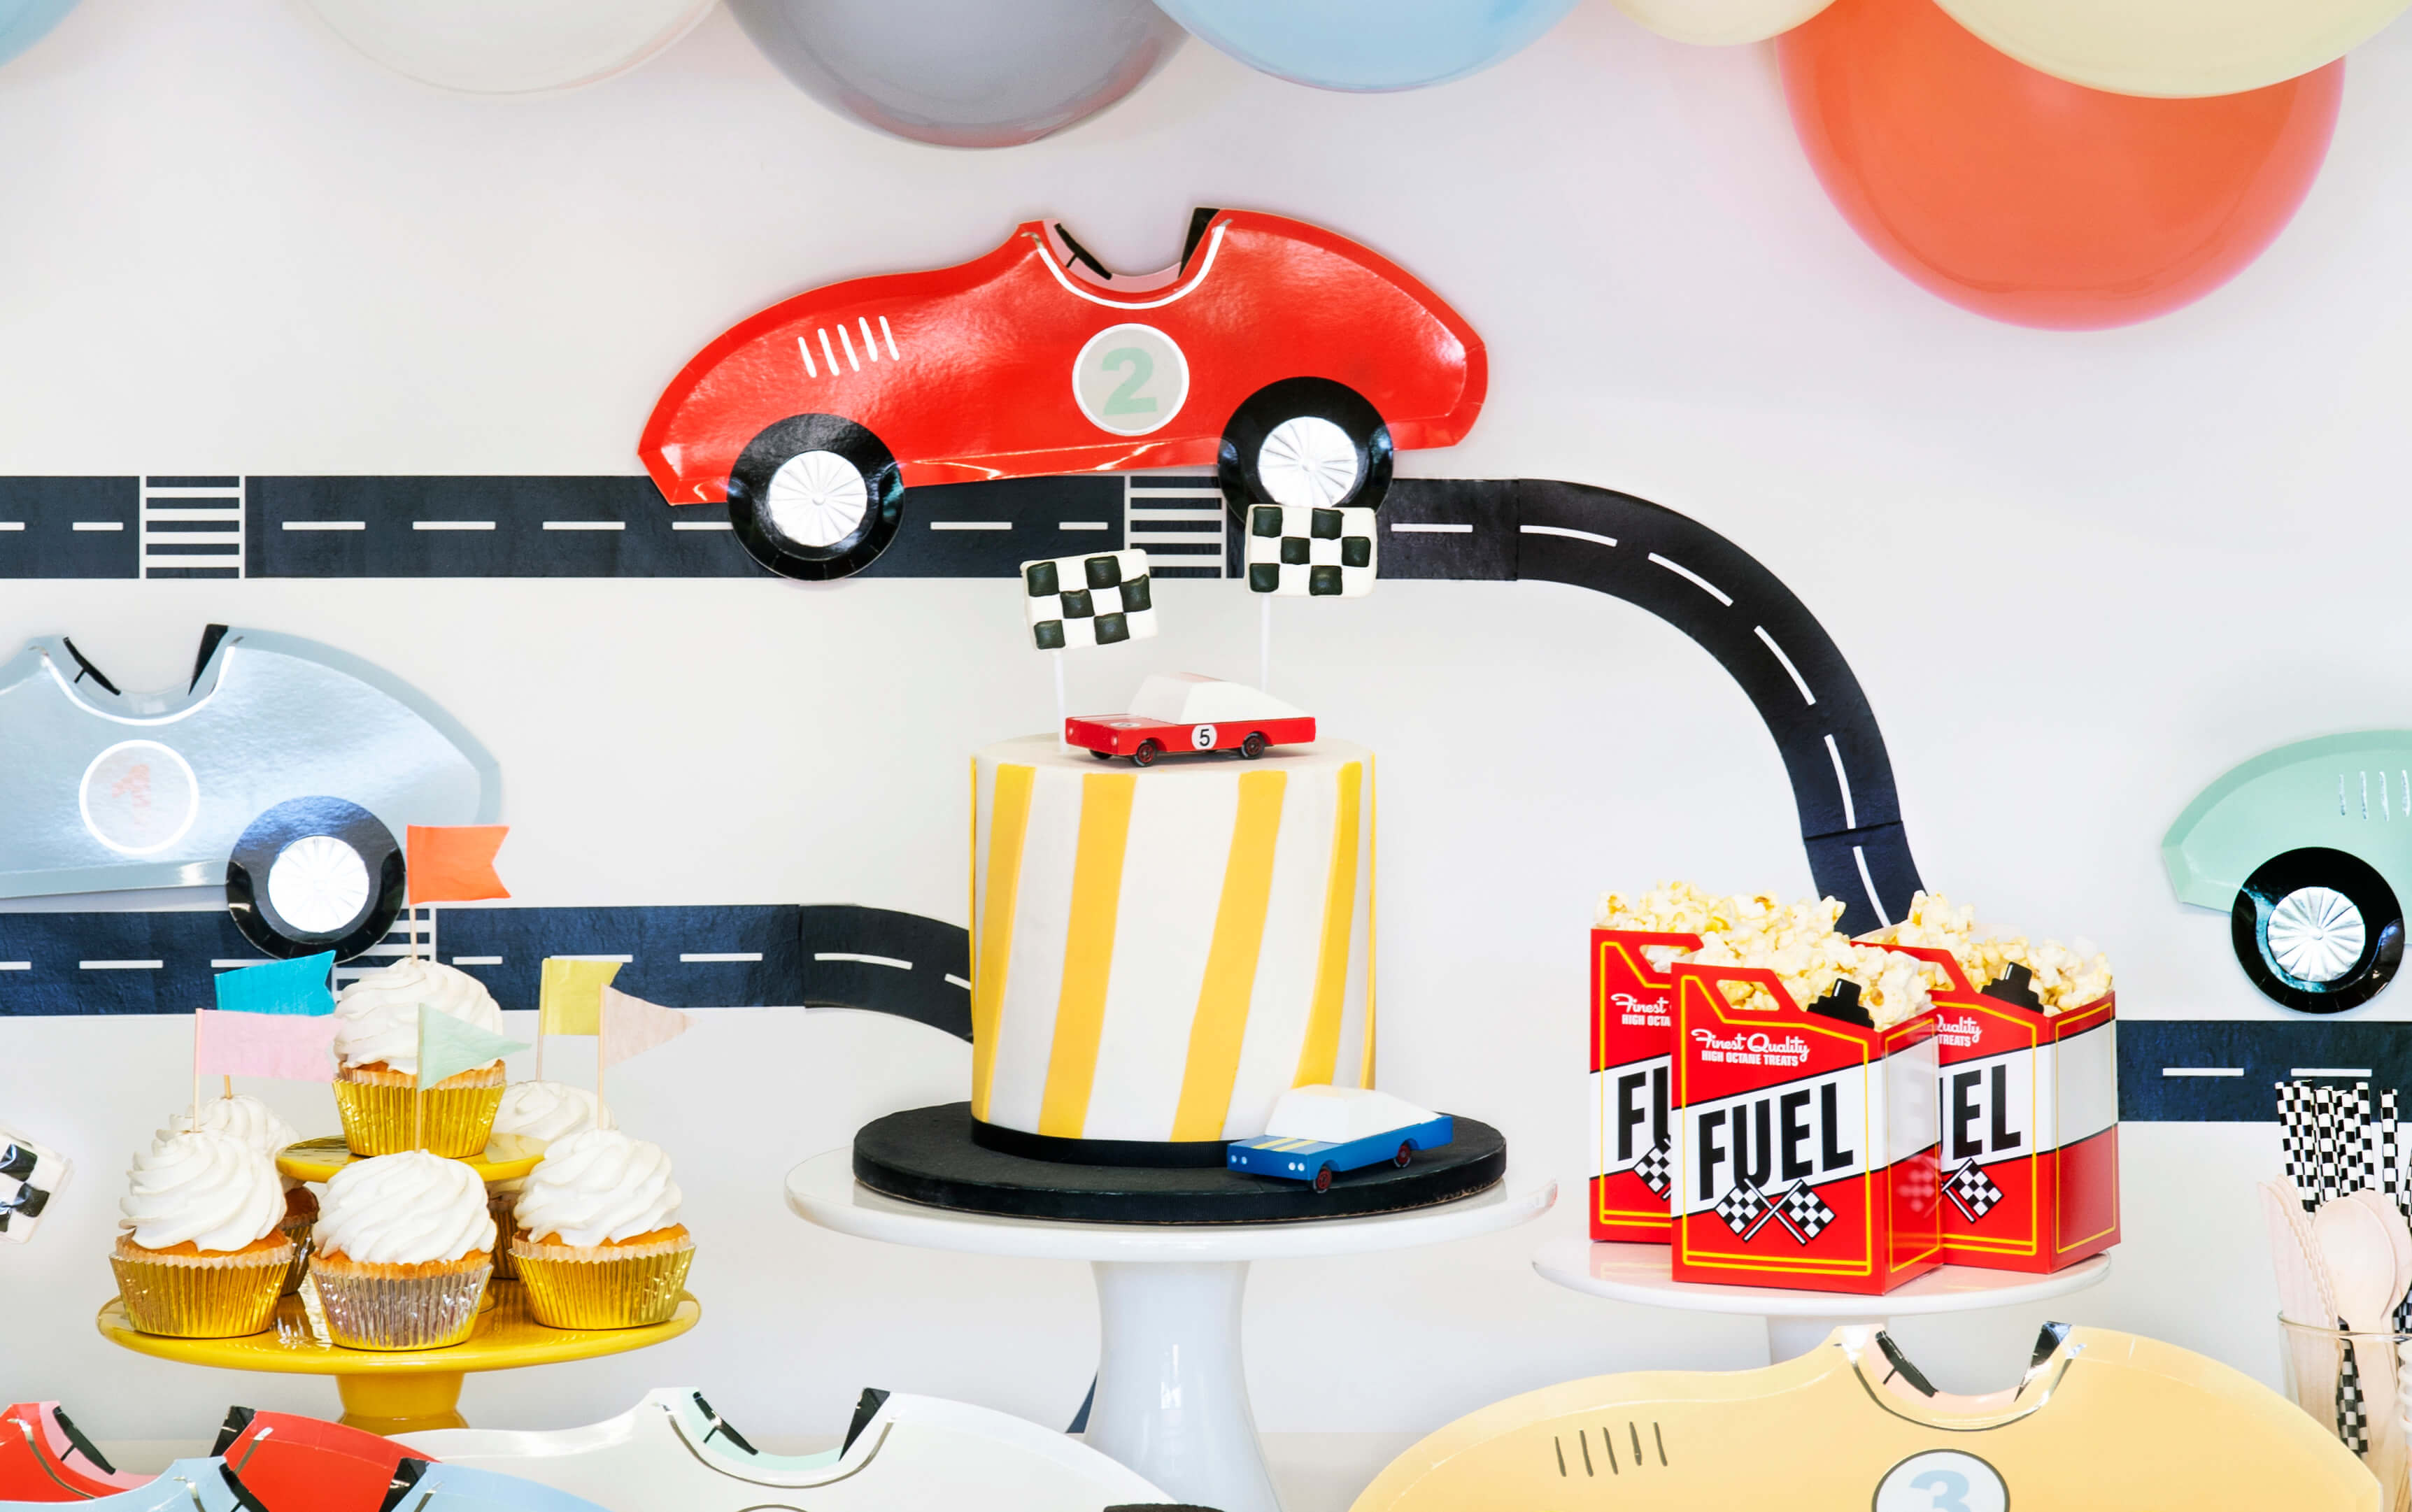 Race Car Themed Party Ideas And Tips for Kids by Momo Party